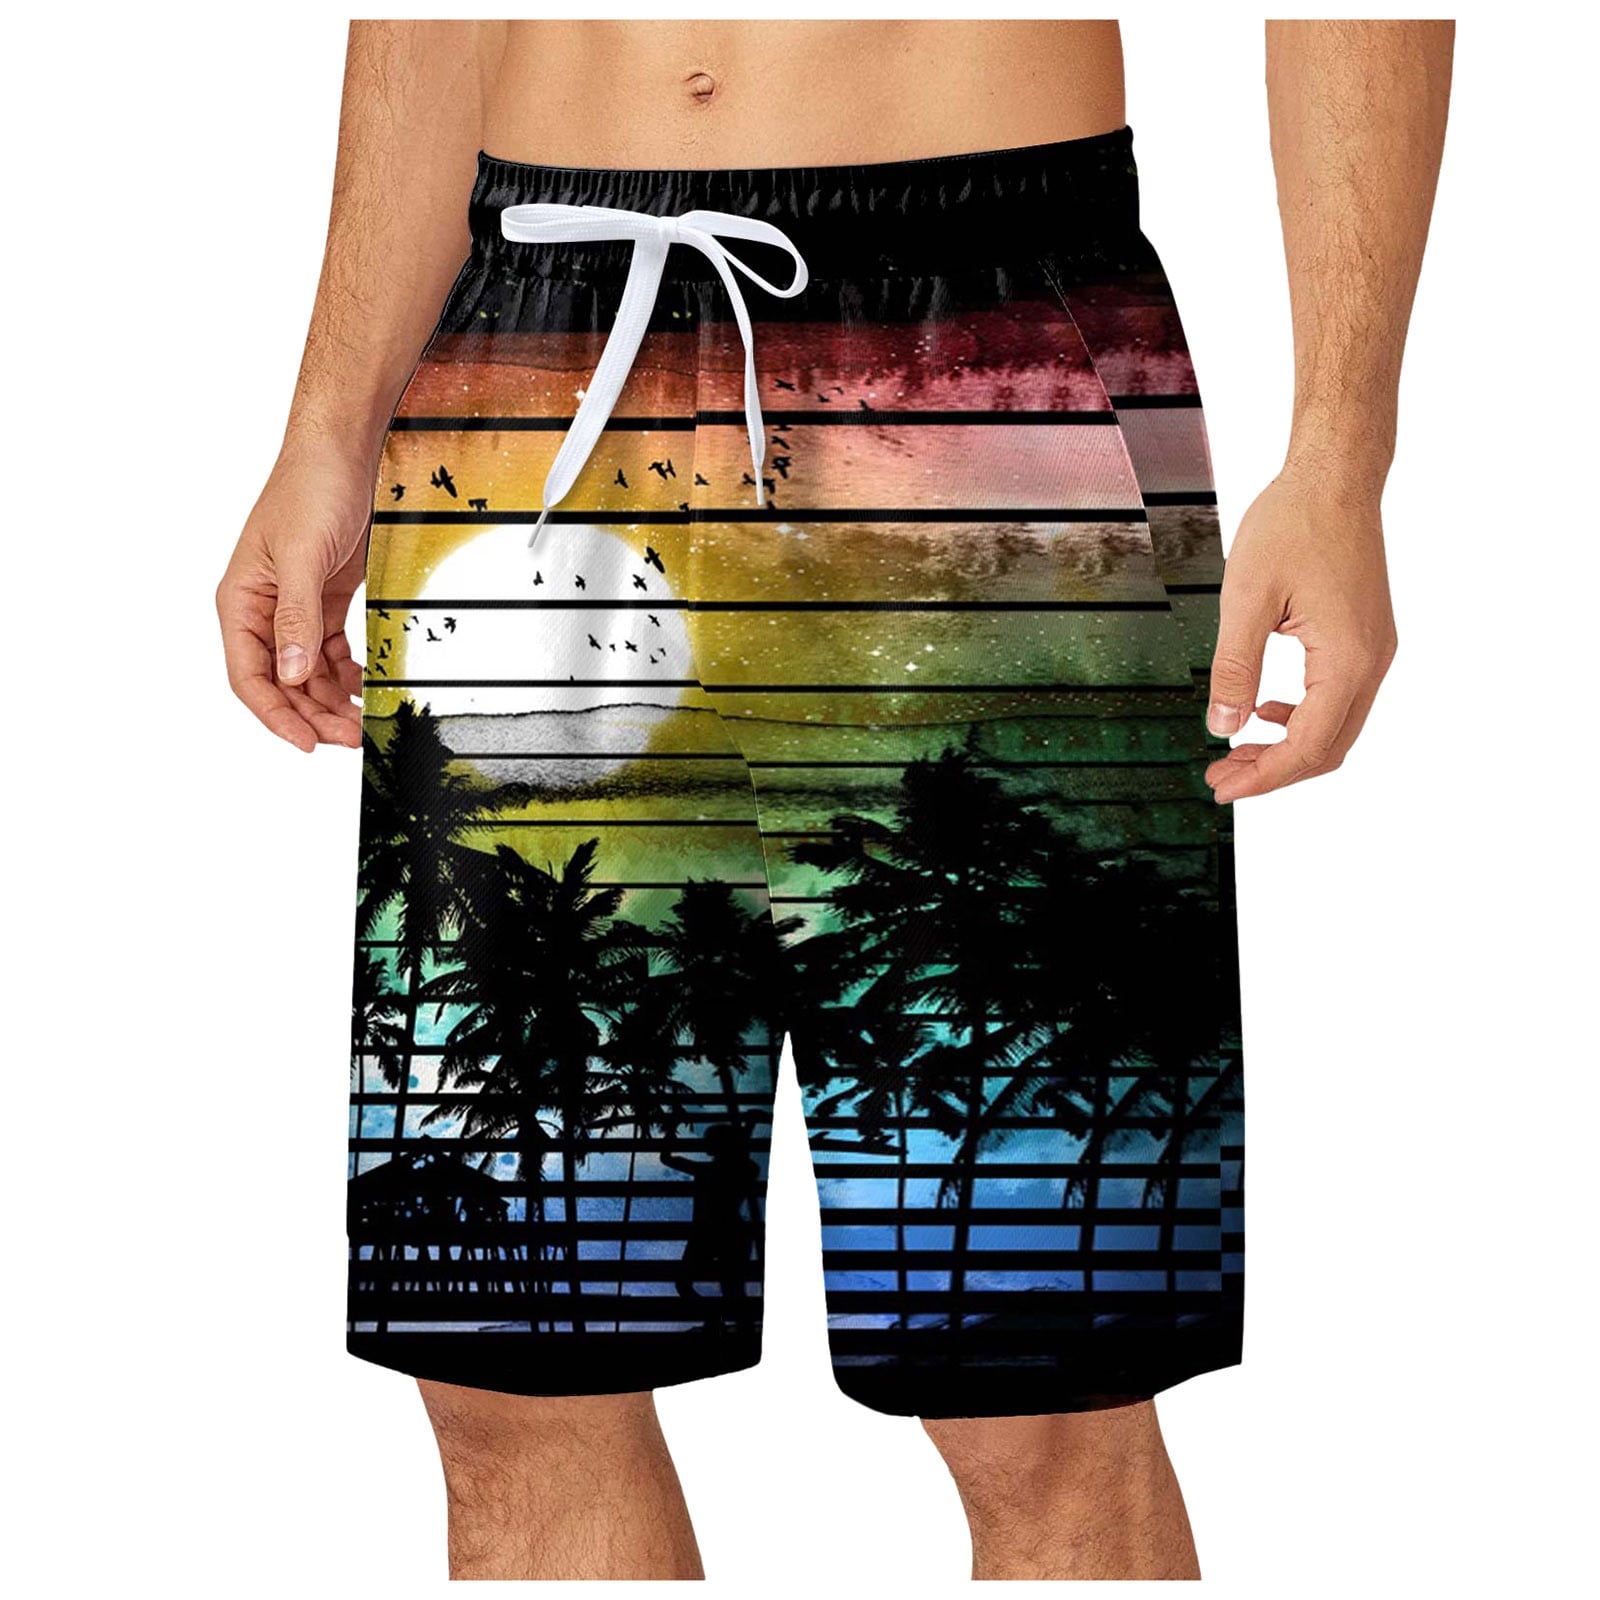 YUIVH Men's Shorts Casual Classic Fit Trousersswimming Shorts Elastic ...